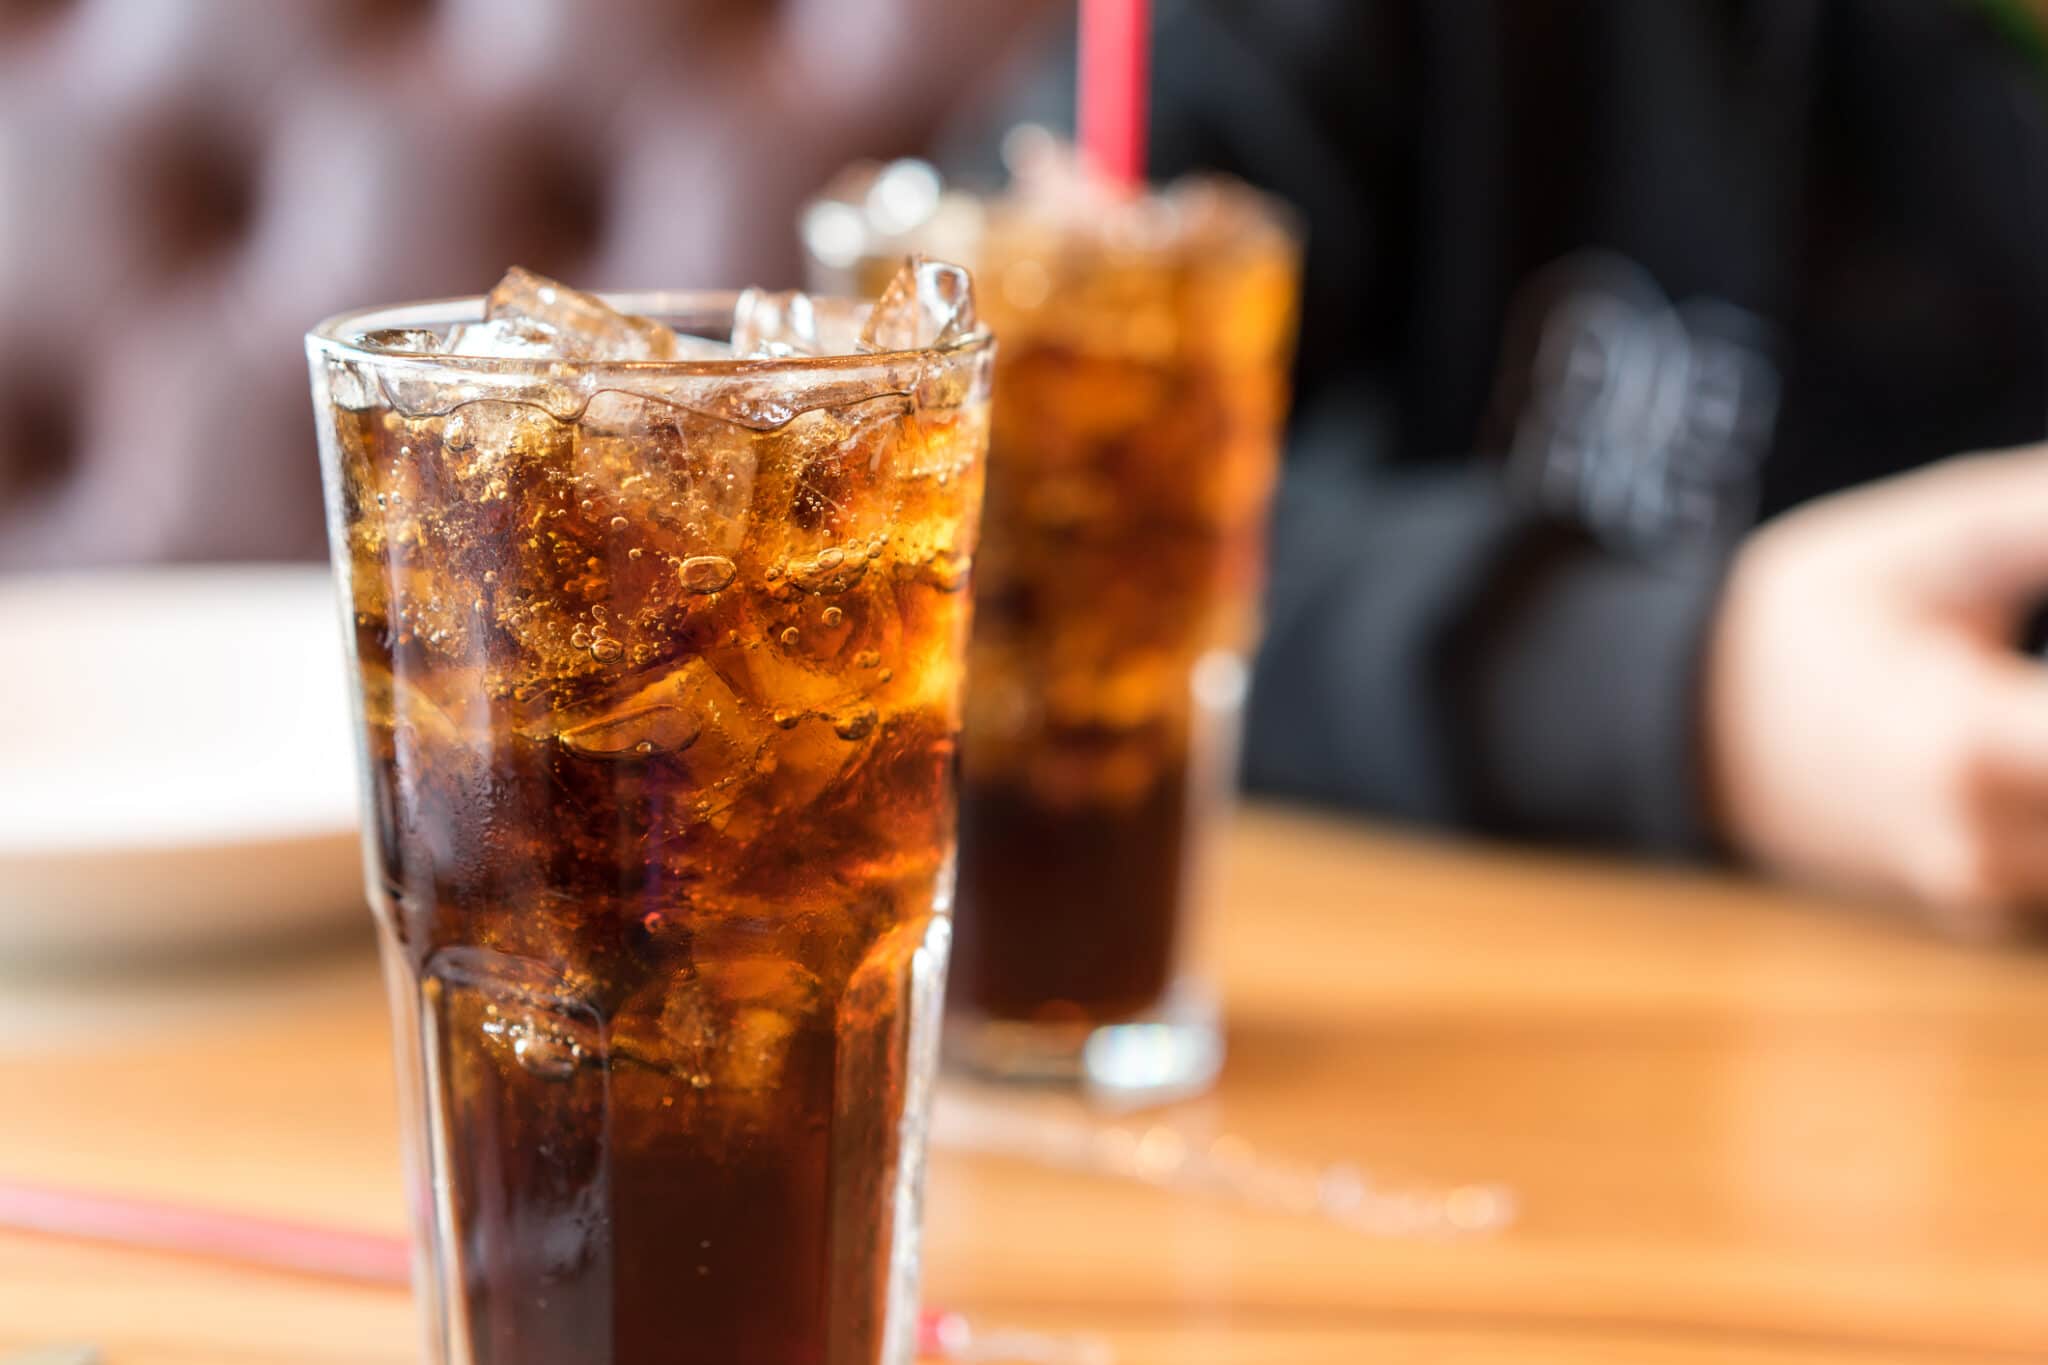 Artificially Sweetened Drinks Could Be As Bad For Your Heart As Sugary Beverages